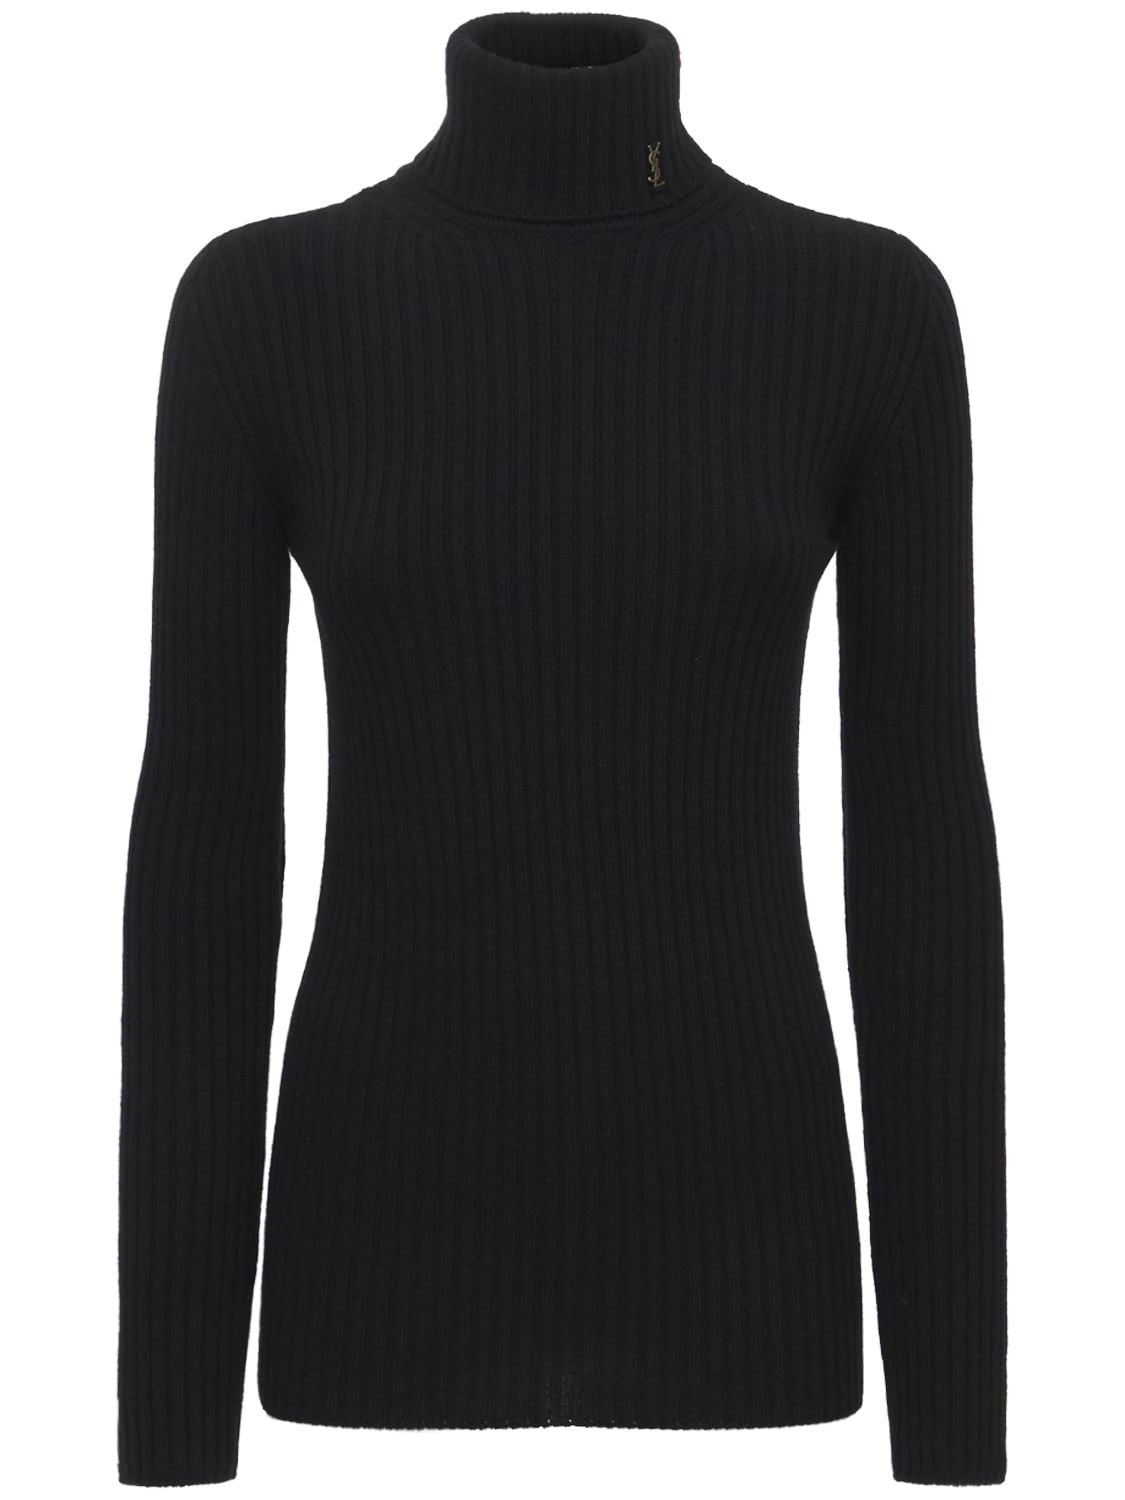 Image of Maille Wool & Cashmere Knit Sweater